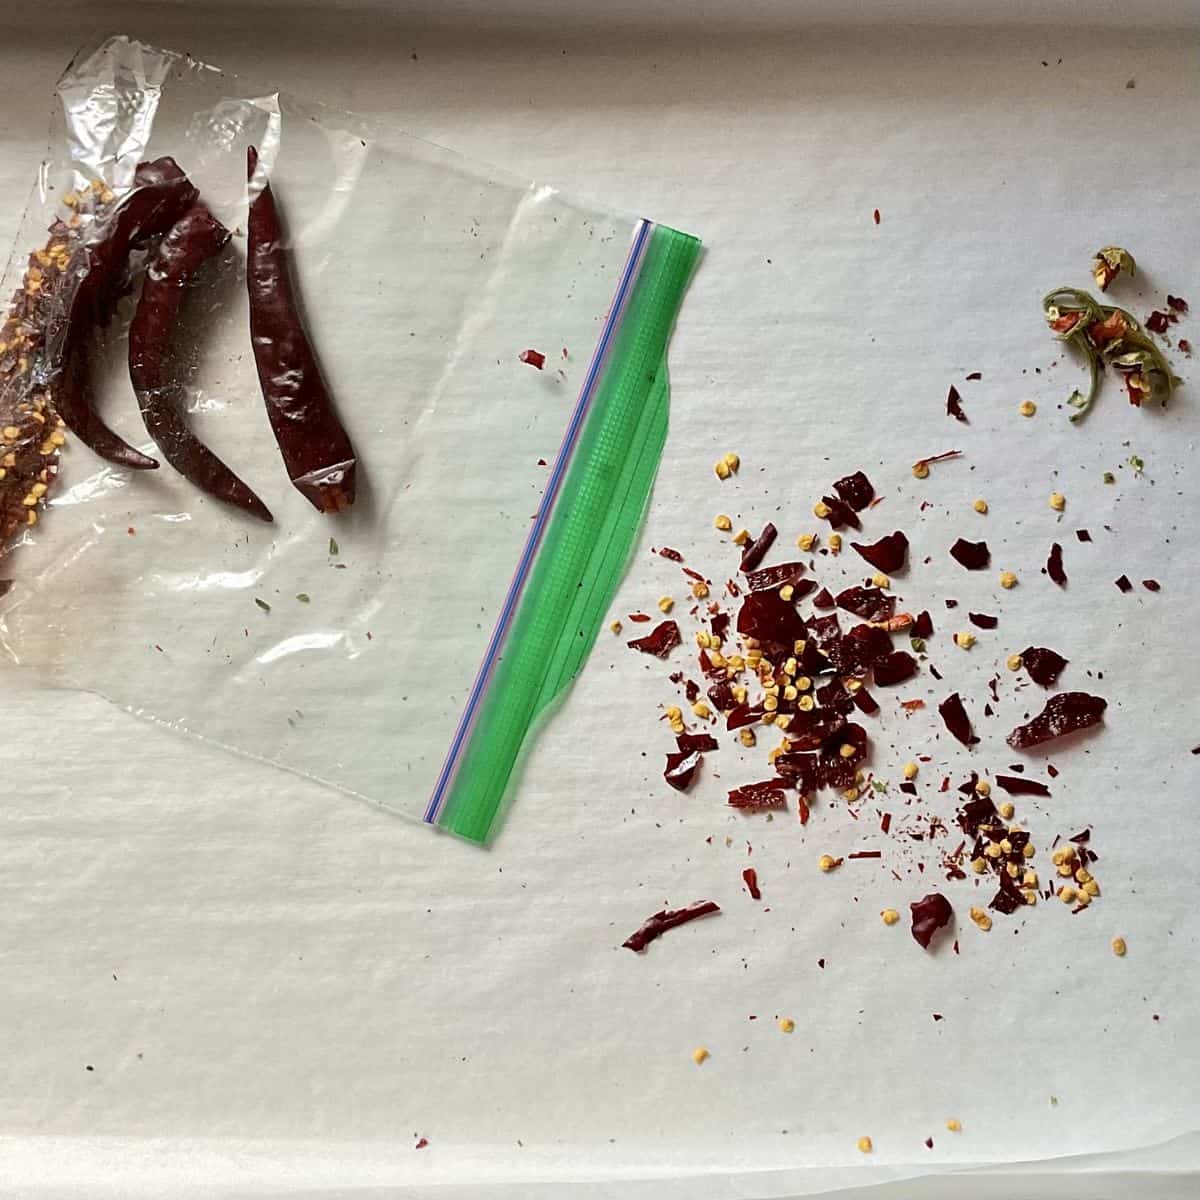 Crushed chili peppers next to a plastic bag.